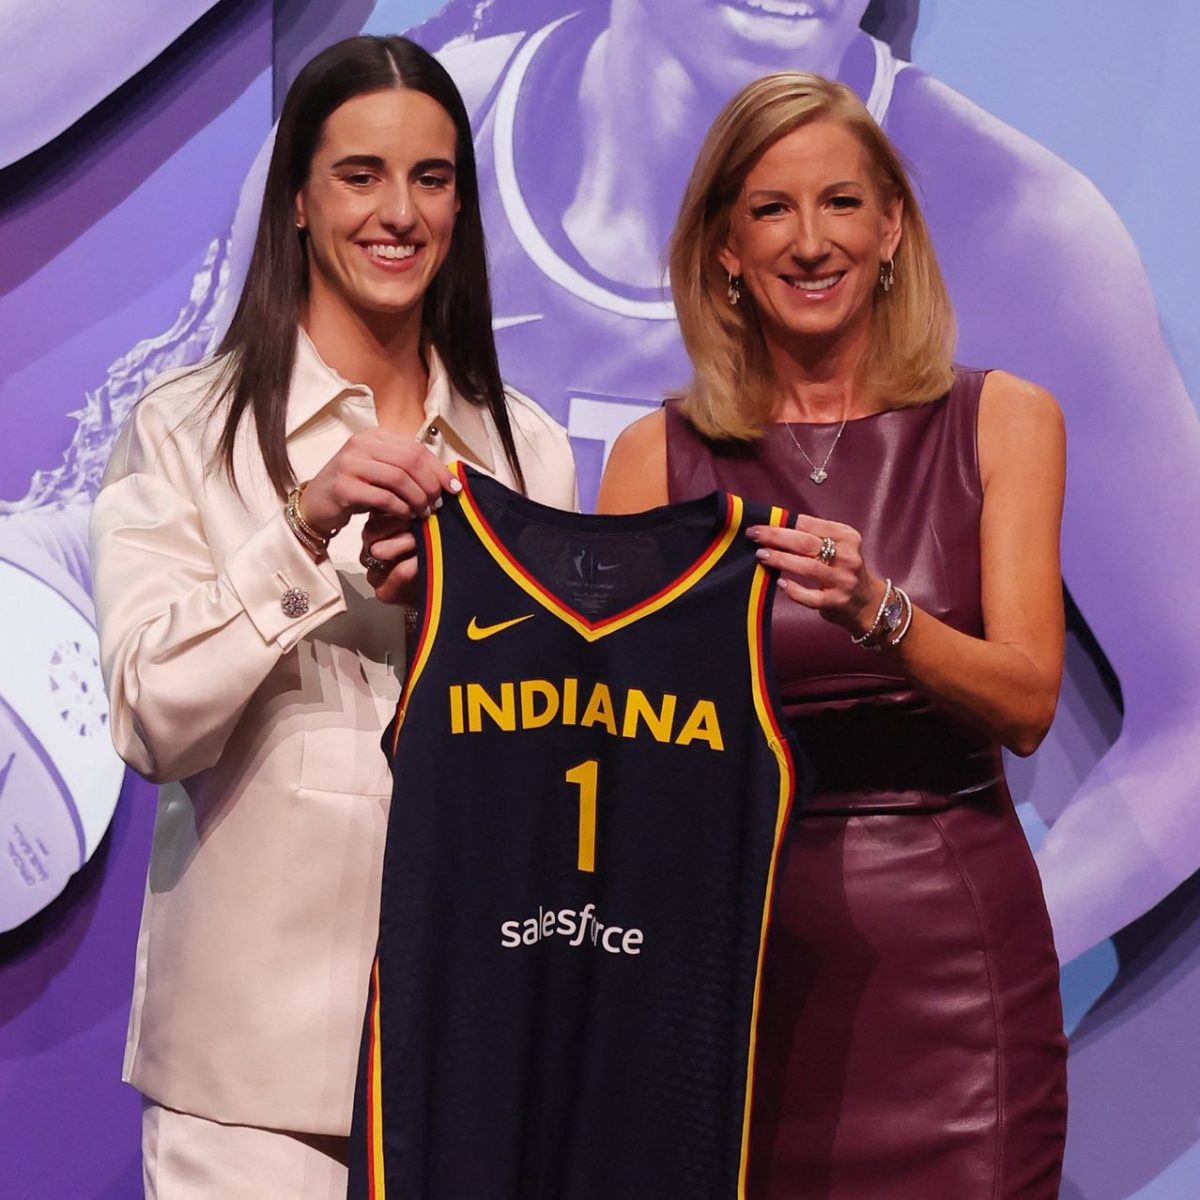 The WNBA’s number one pick for the draft, Caitlin Clark, takes a picture signing with her team Indiana Fever.
